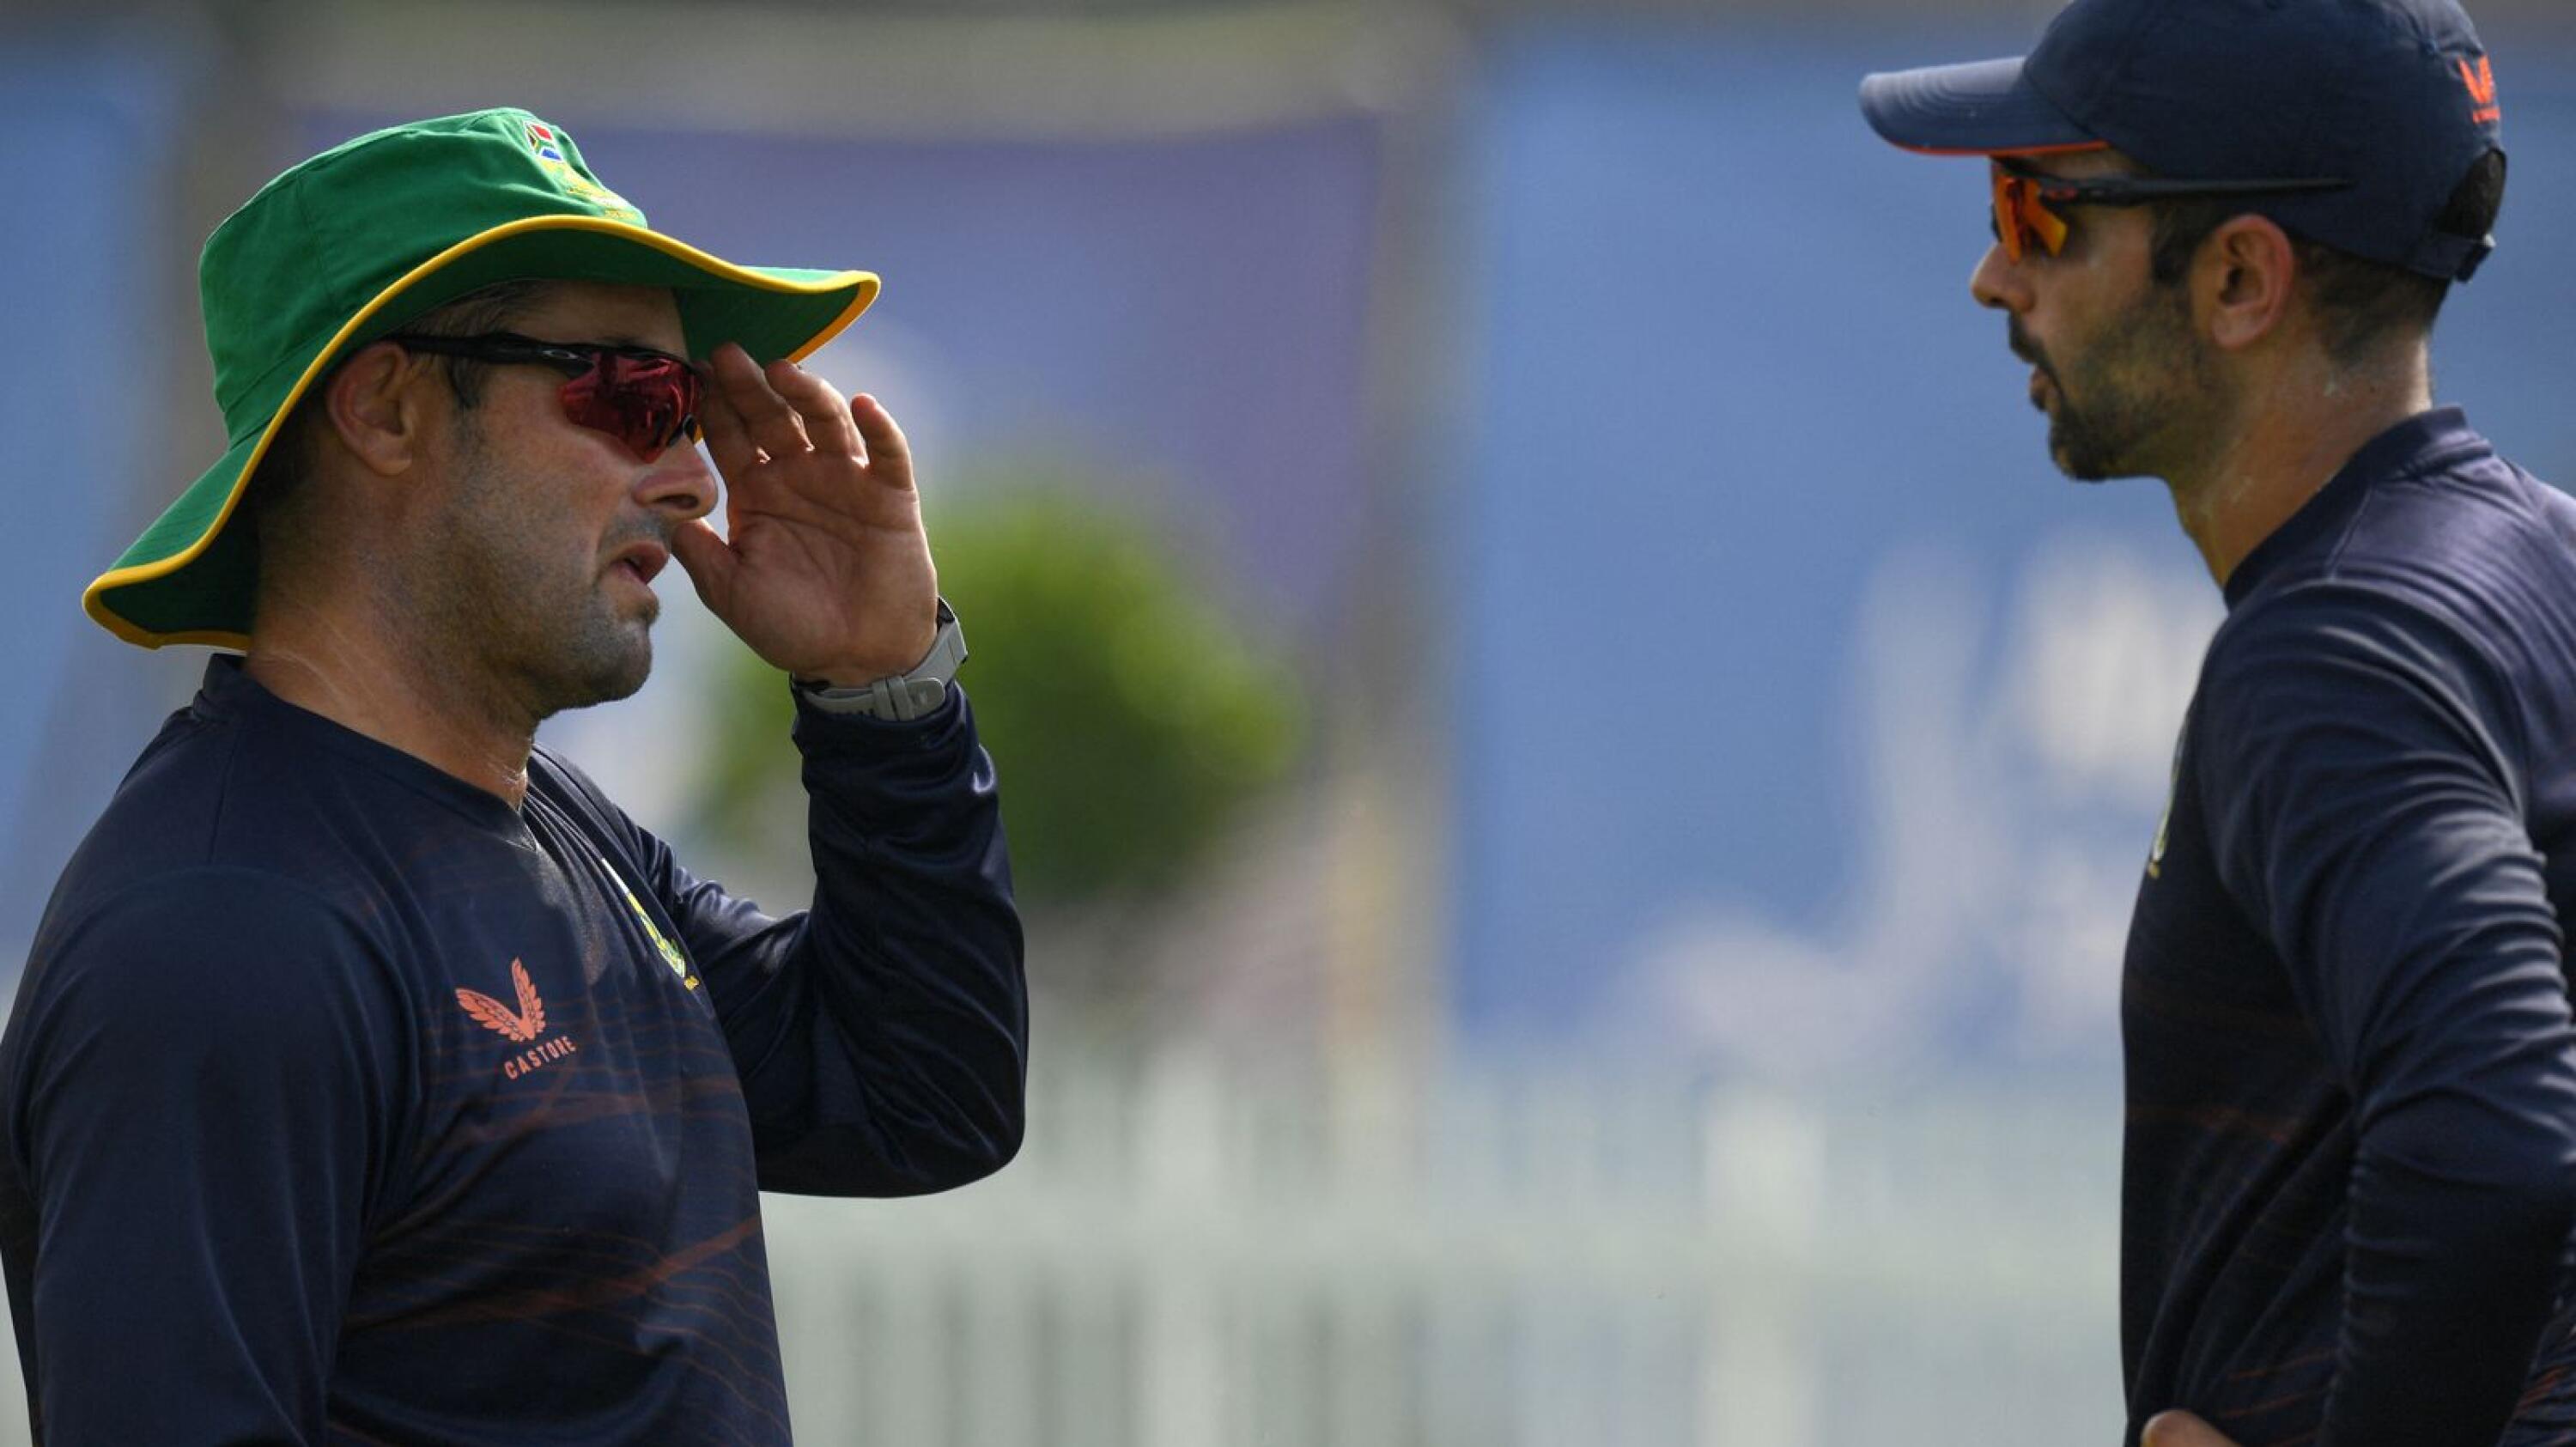 Mark Boucher speaks with Keshav Maharaj during a practice session. Picture: Indranil Mukerjee AFP